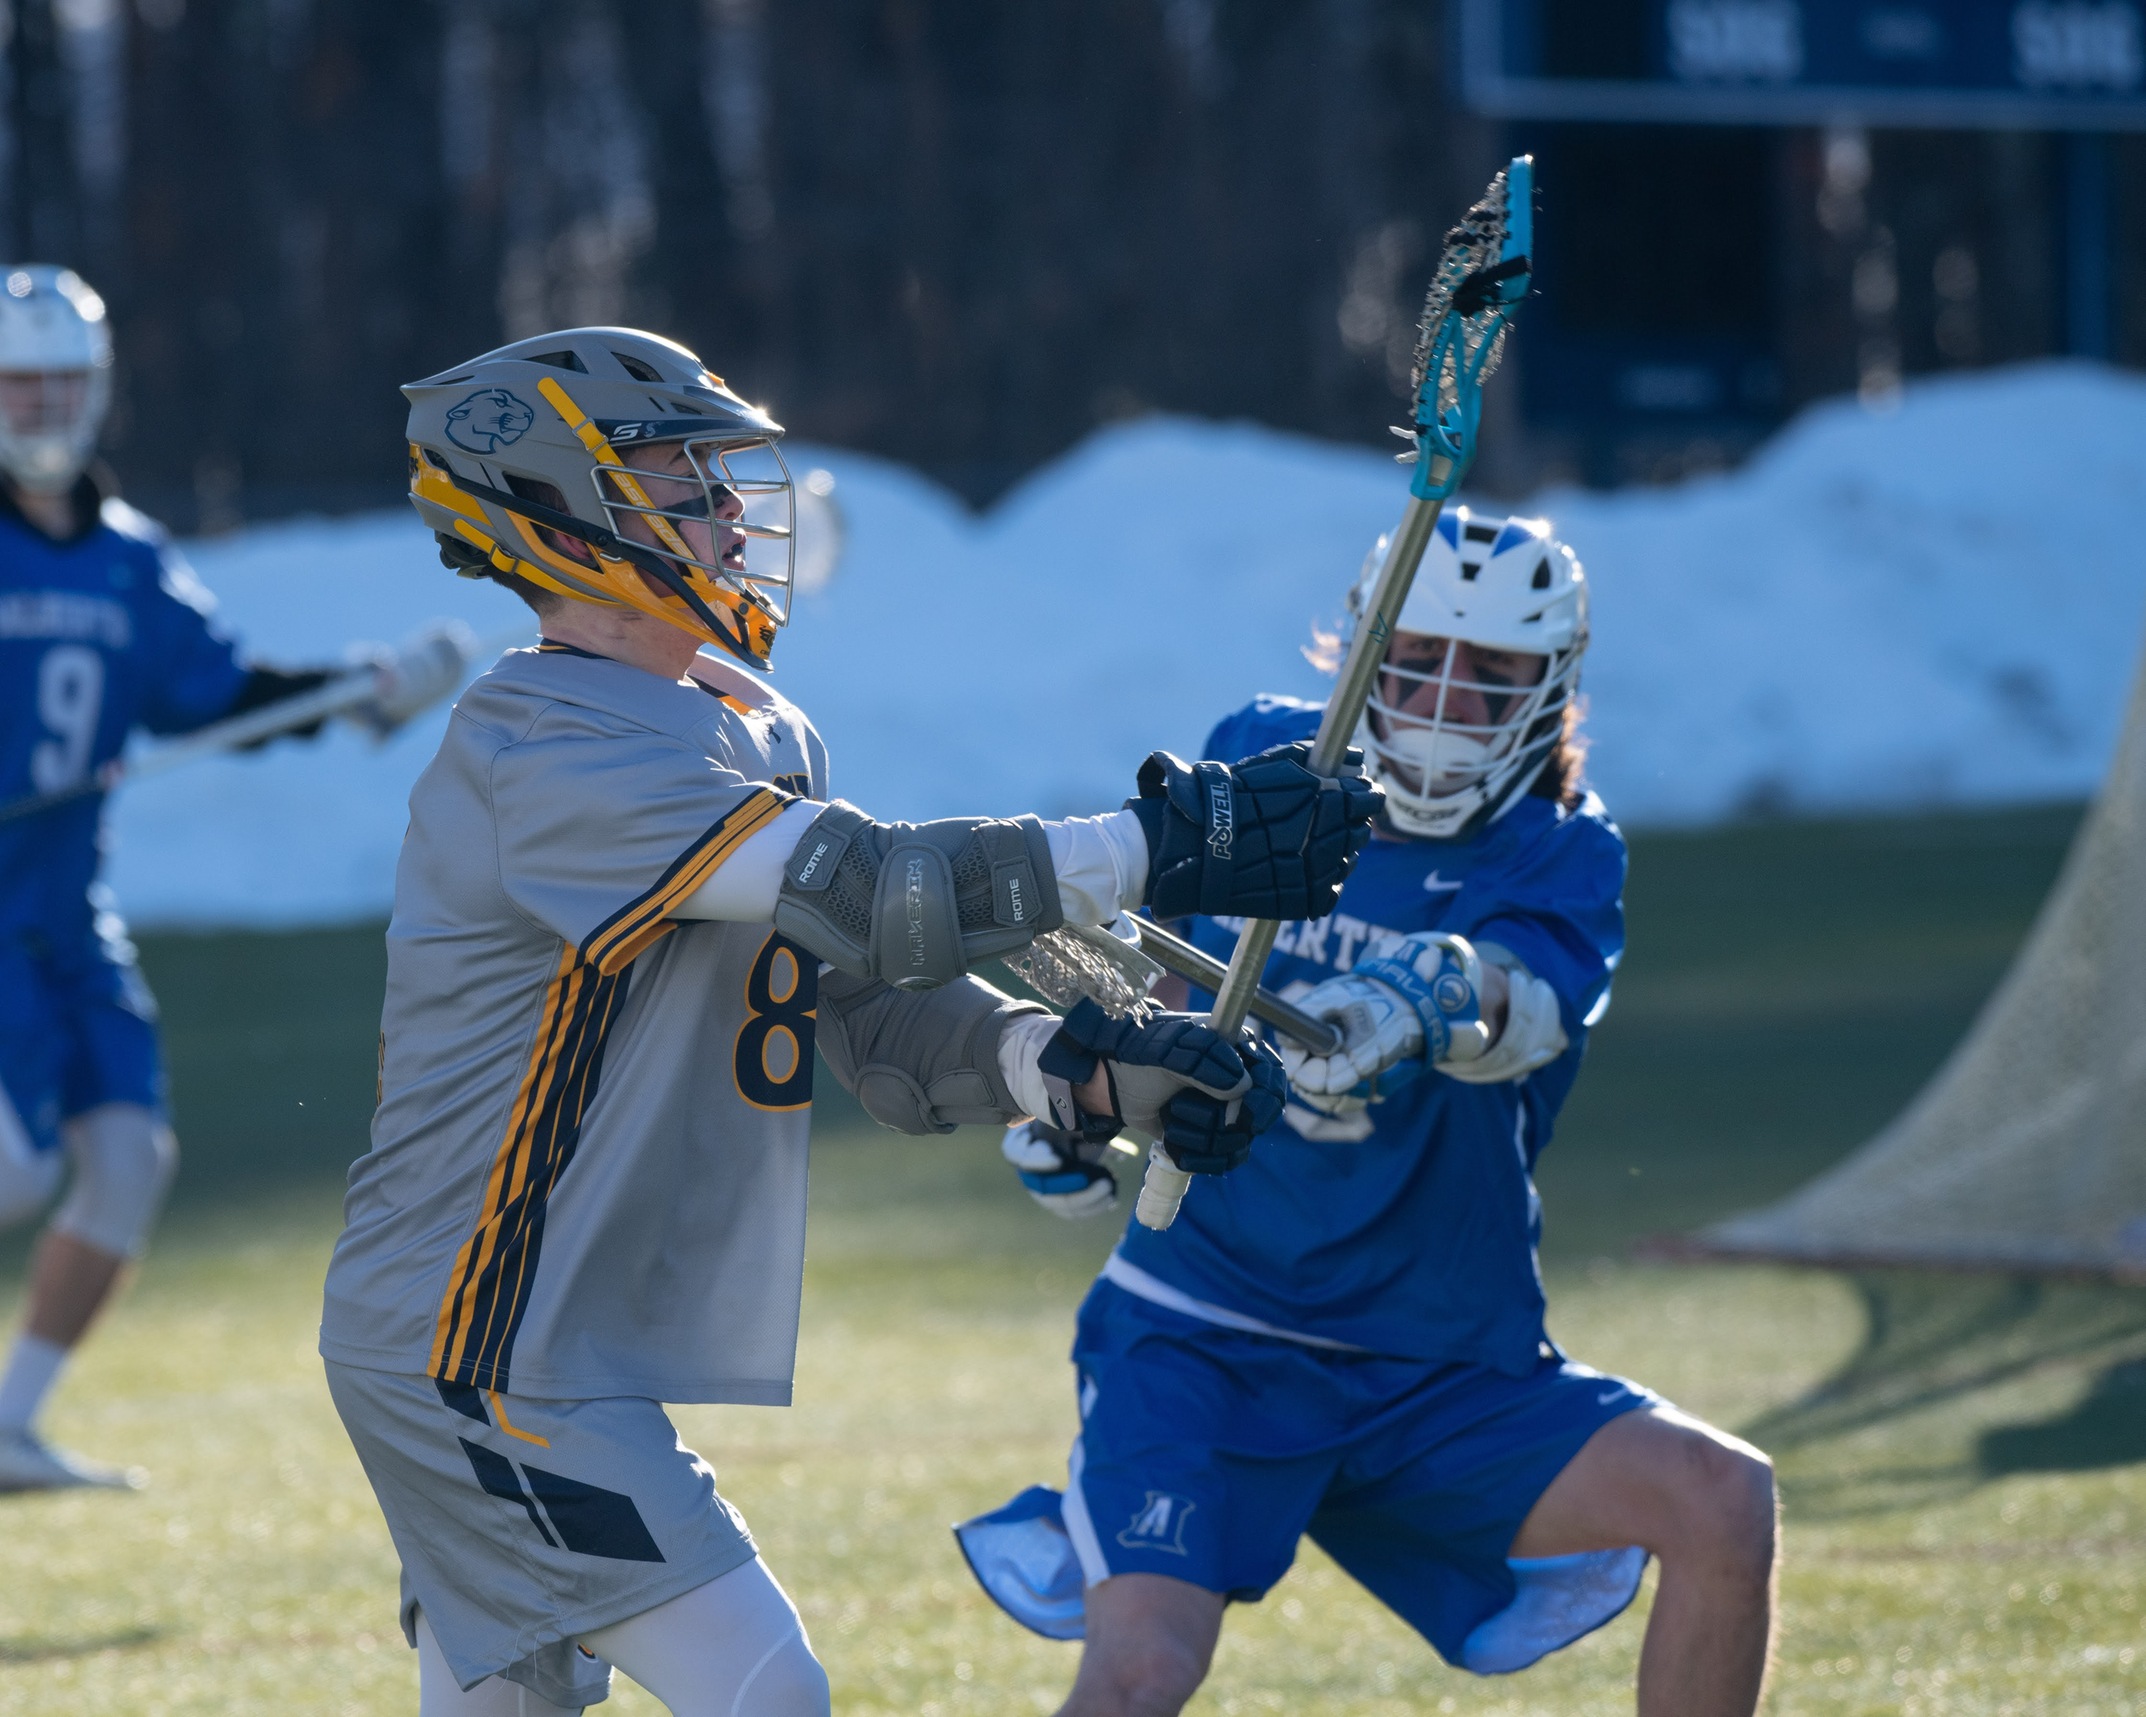 Haley, Hankel have productive nights but Men's Lacrosse falls 15-9 to Poly